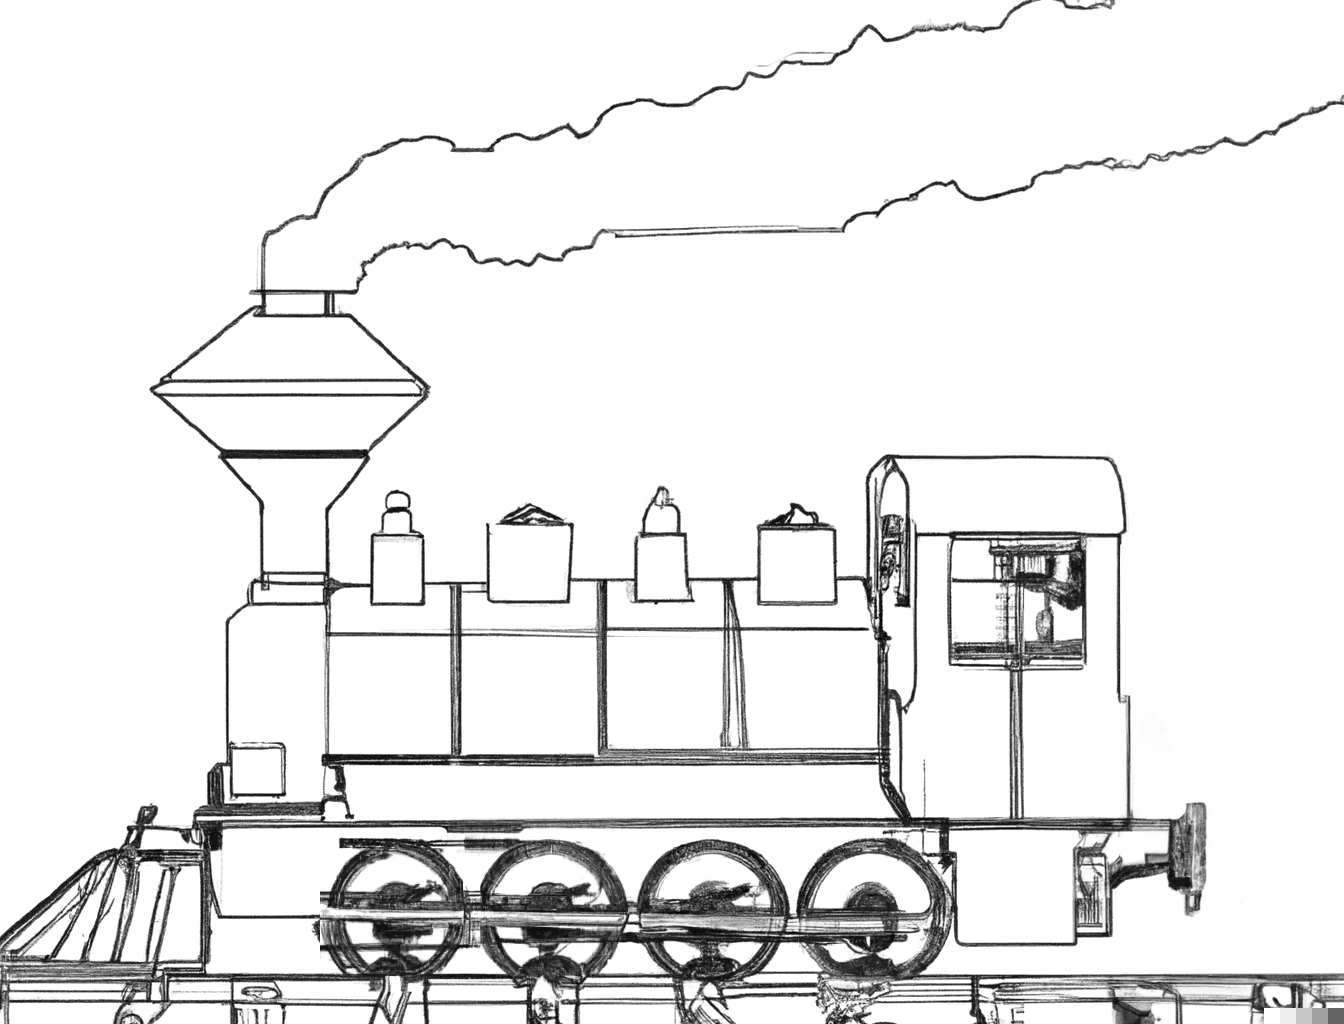 Smoking steam engine, running from right to left, pencil sketch, generated by DALL-E 2